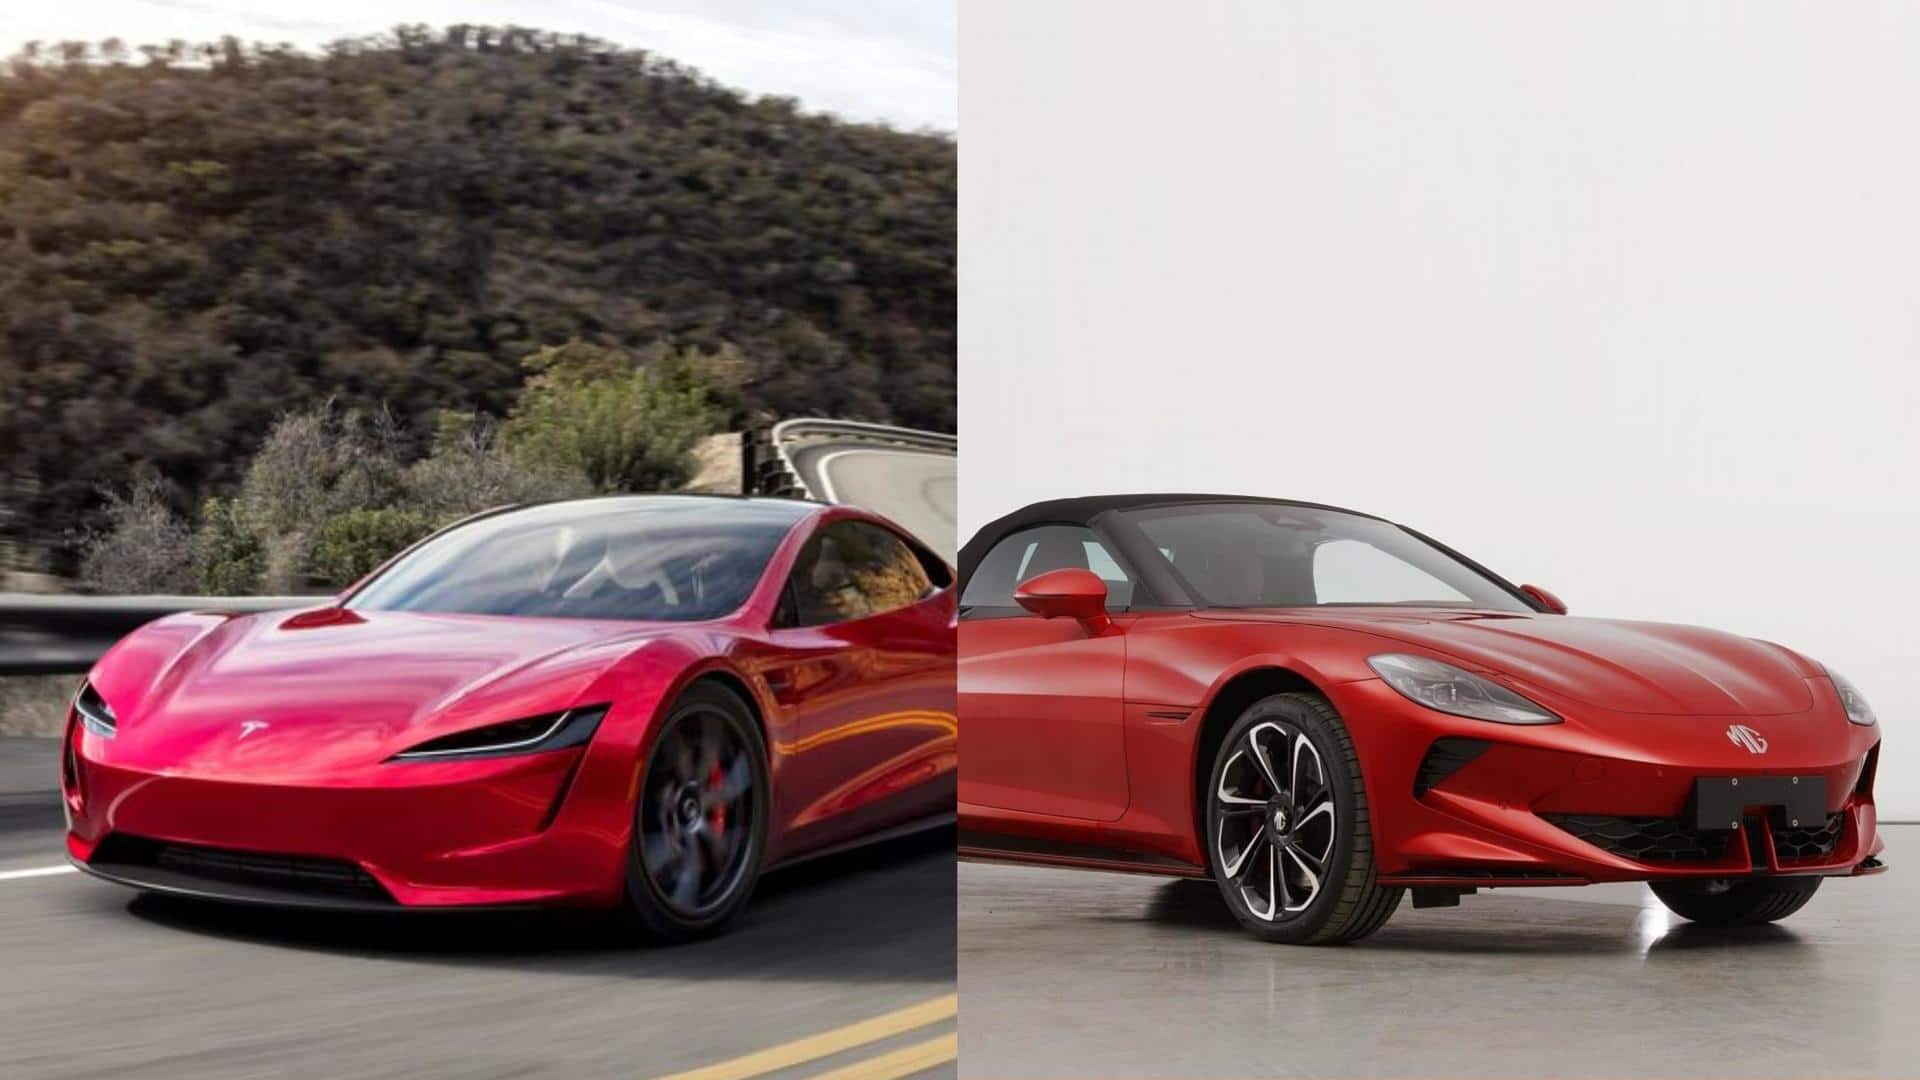 How does MG Cyberster stack up against Tesla Roadster